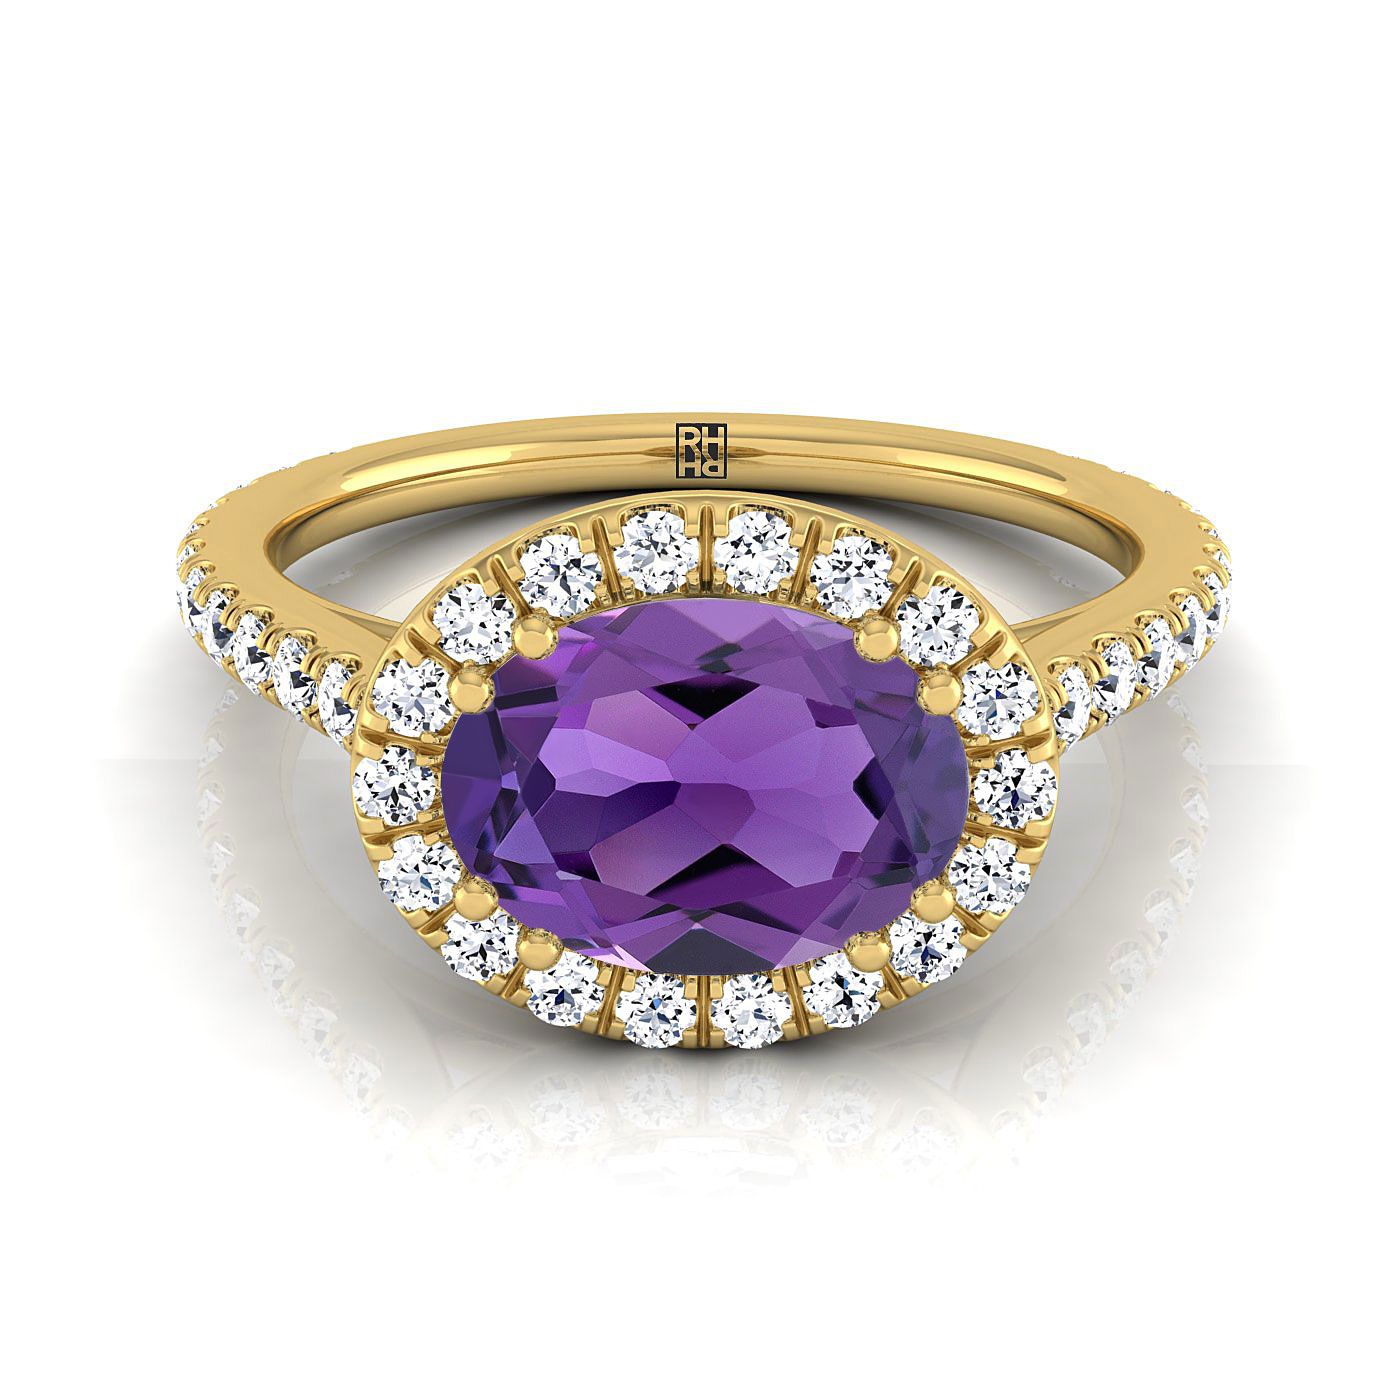 14K Yellow Gold Oval Amethyst Horizontal Fancy East West Diamond Halo Engagement Ring -1/2ctw